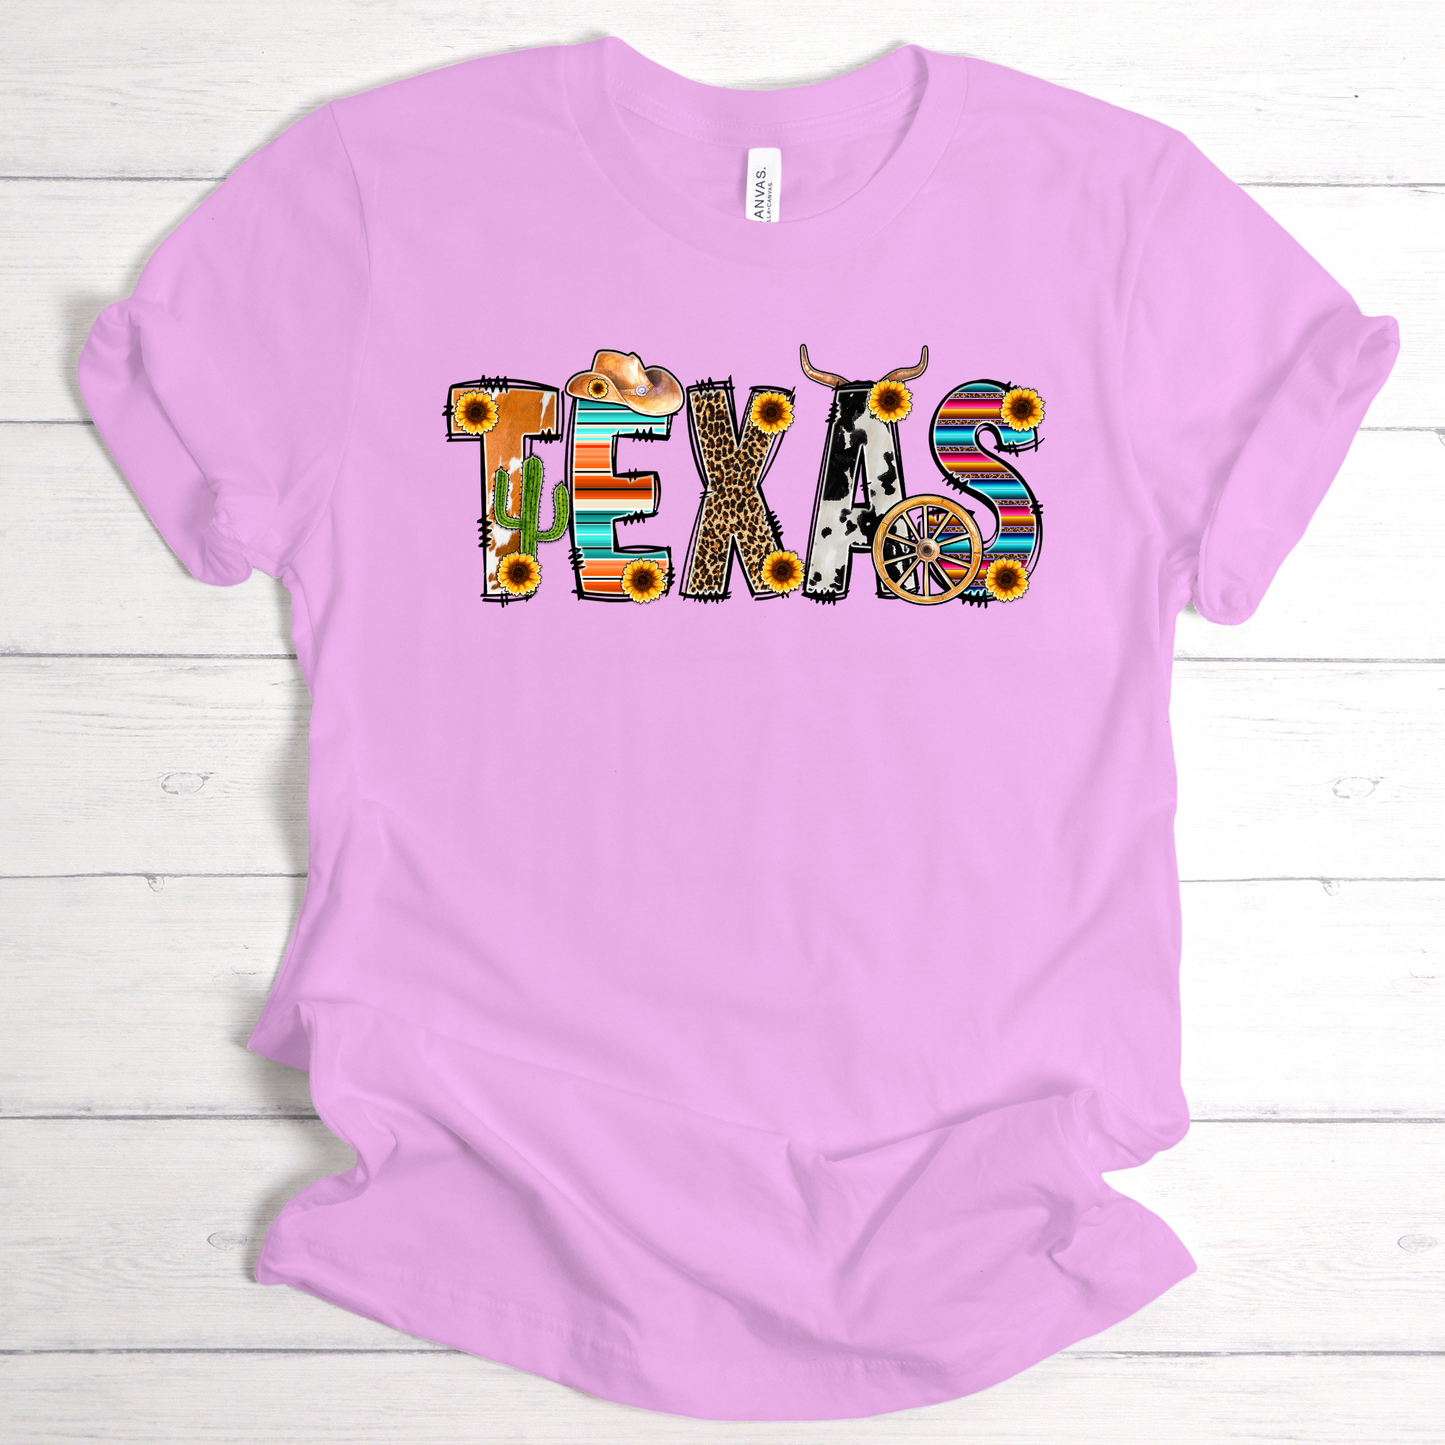 Texas Pride T-shirt | Featuring Iconic Texan Elements - Longhorns, Desert Scenery, and Classic 'Howdy' Charm